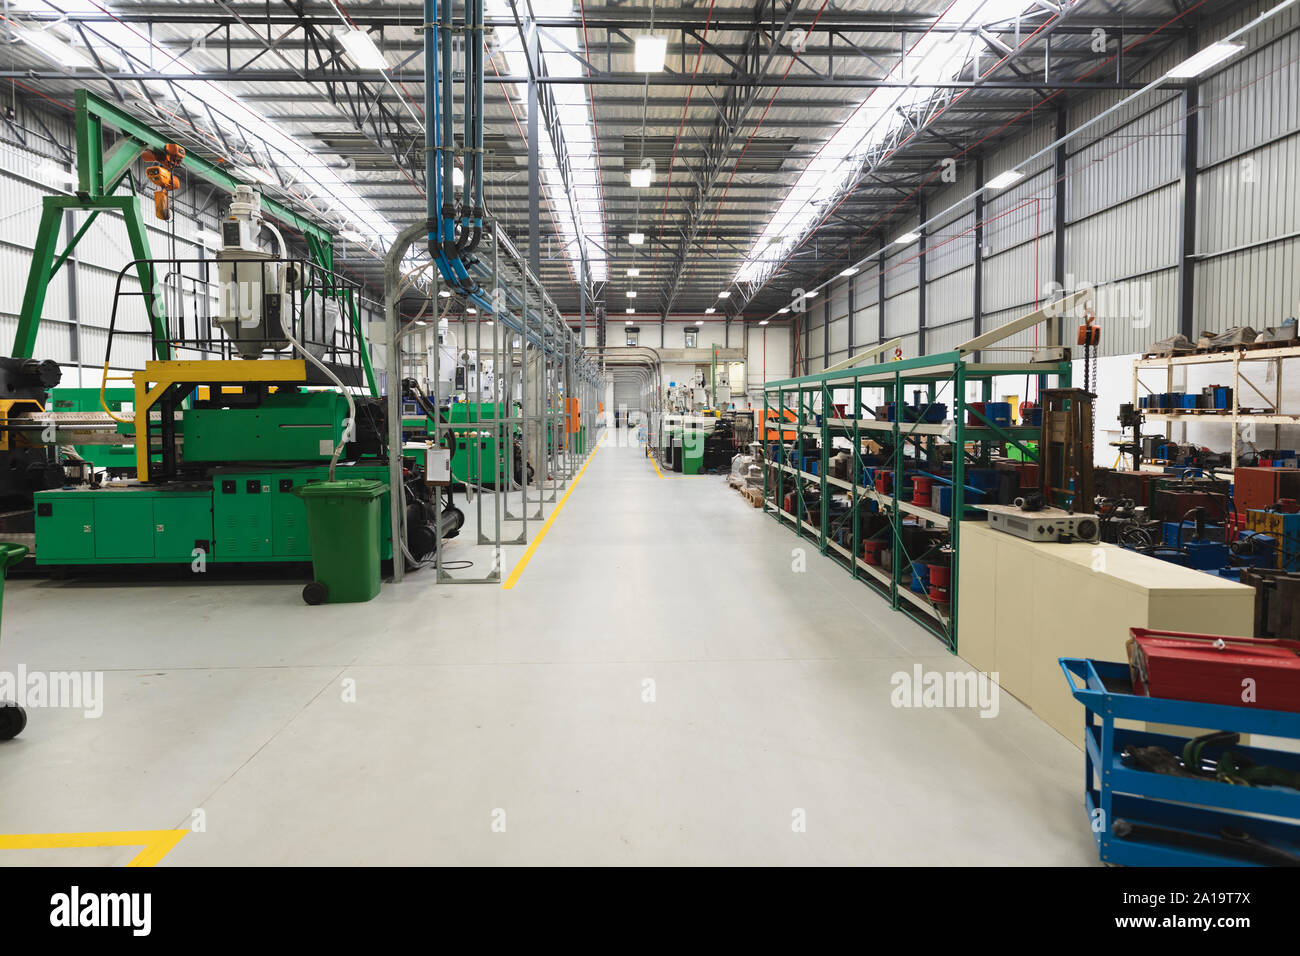 Machinery in a factory warehouse building Stock Photo